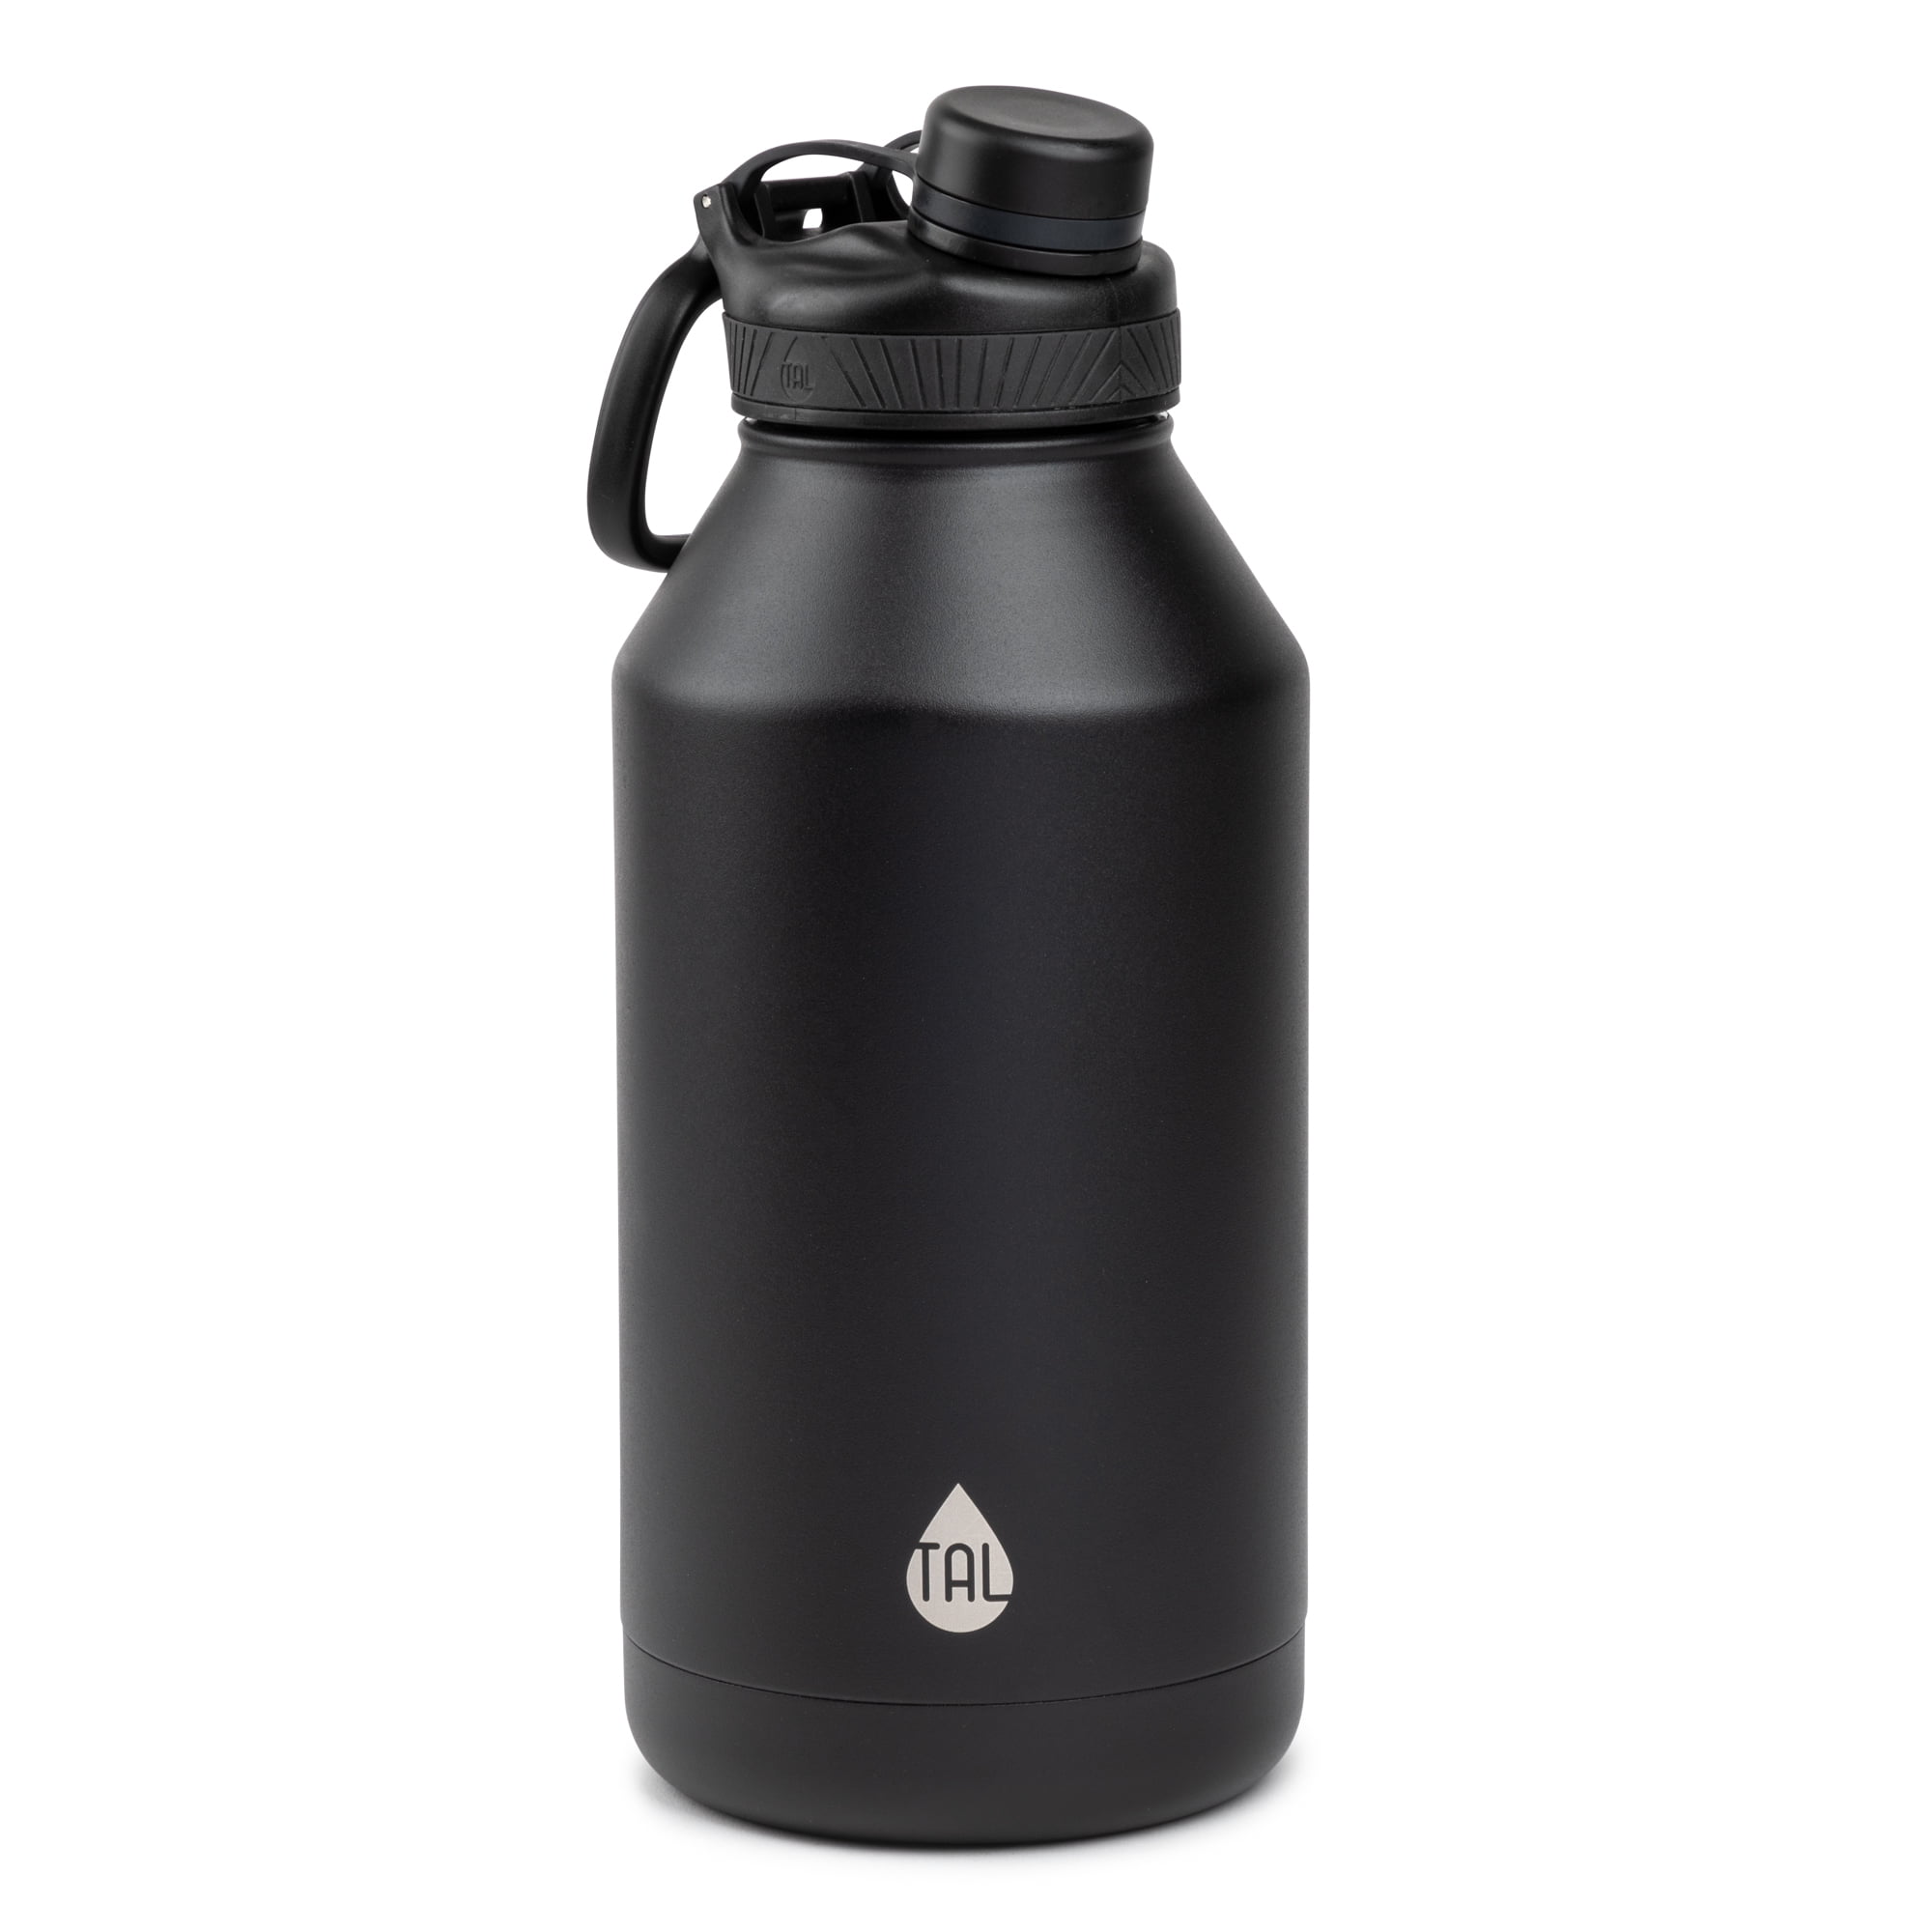 TAL Teal 64oz Double Wall Vacuum Insulated Stainless Steel Ranger™ Pro Thermos 